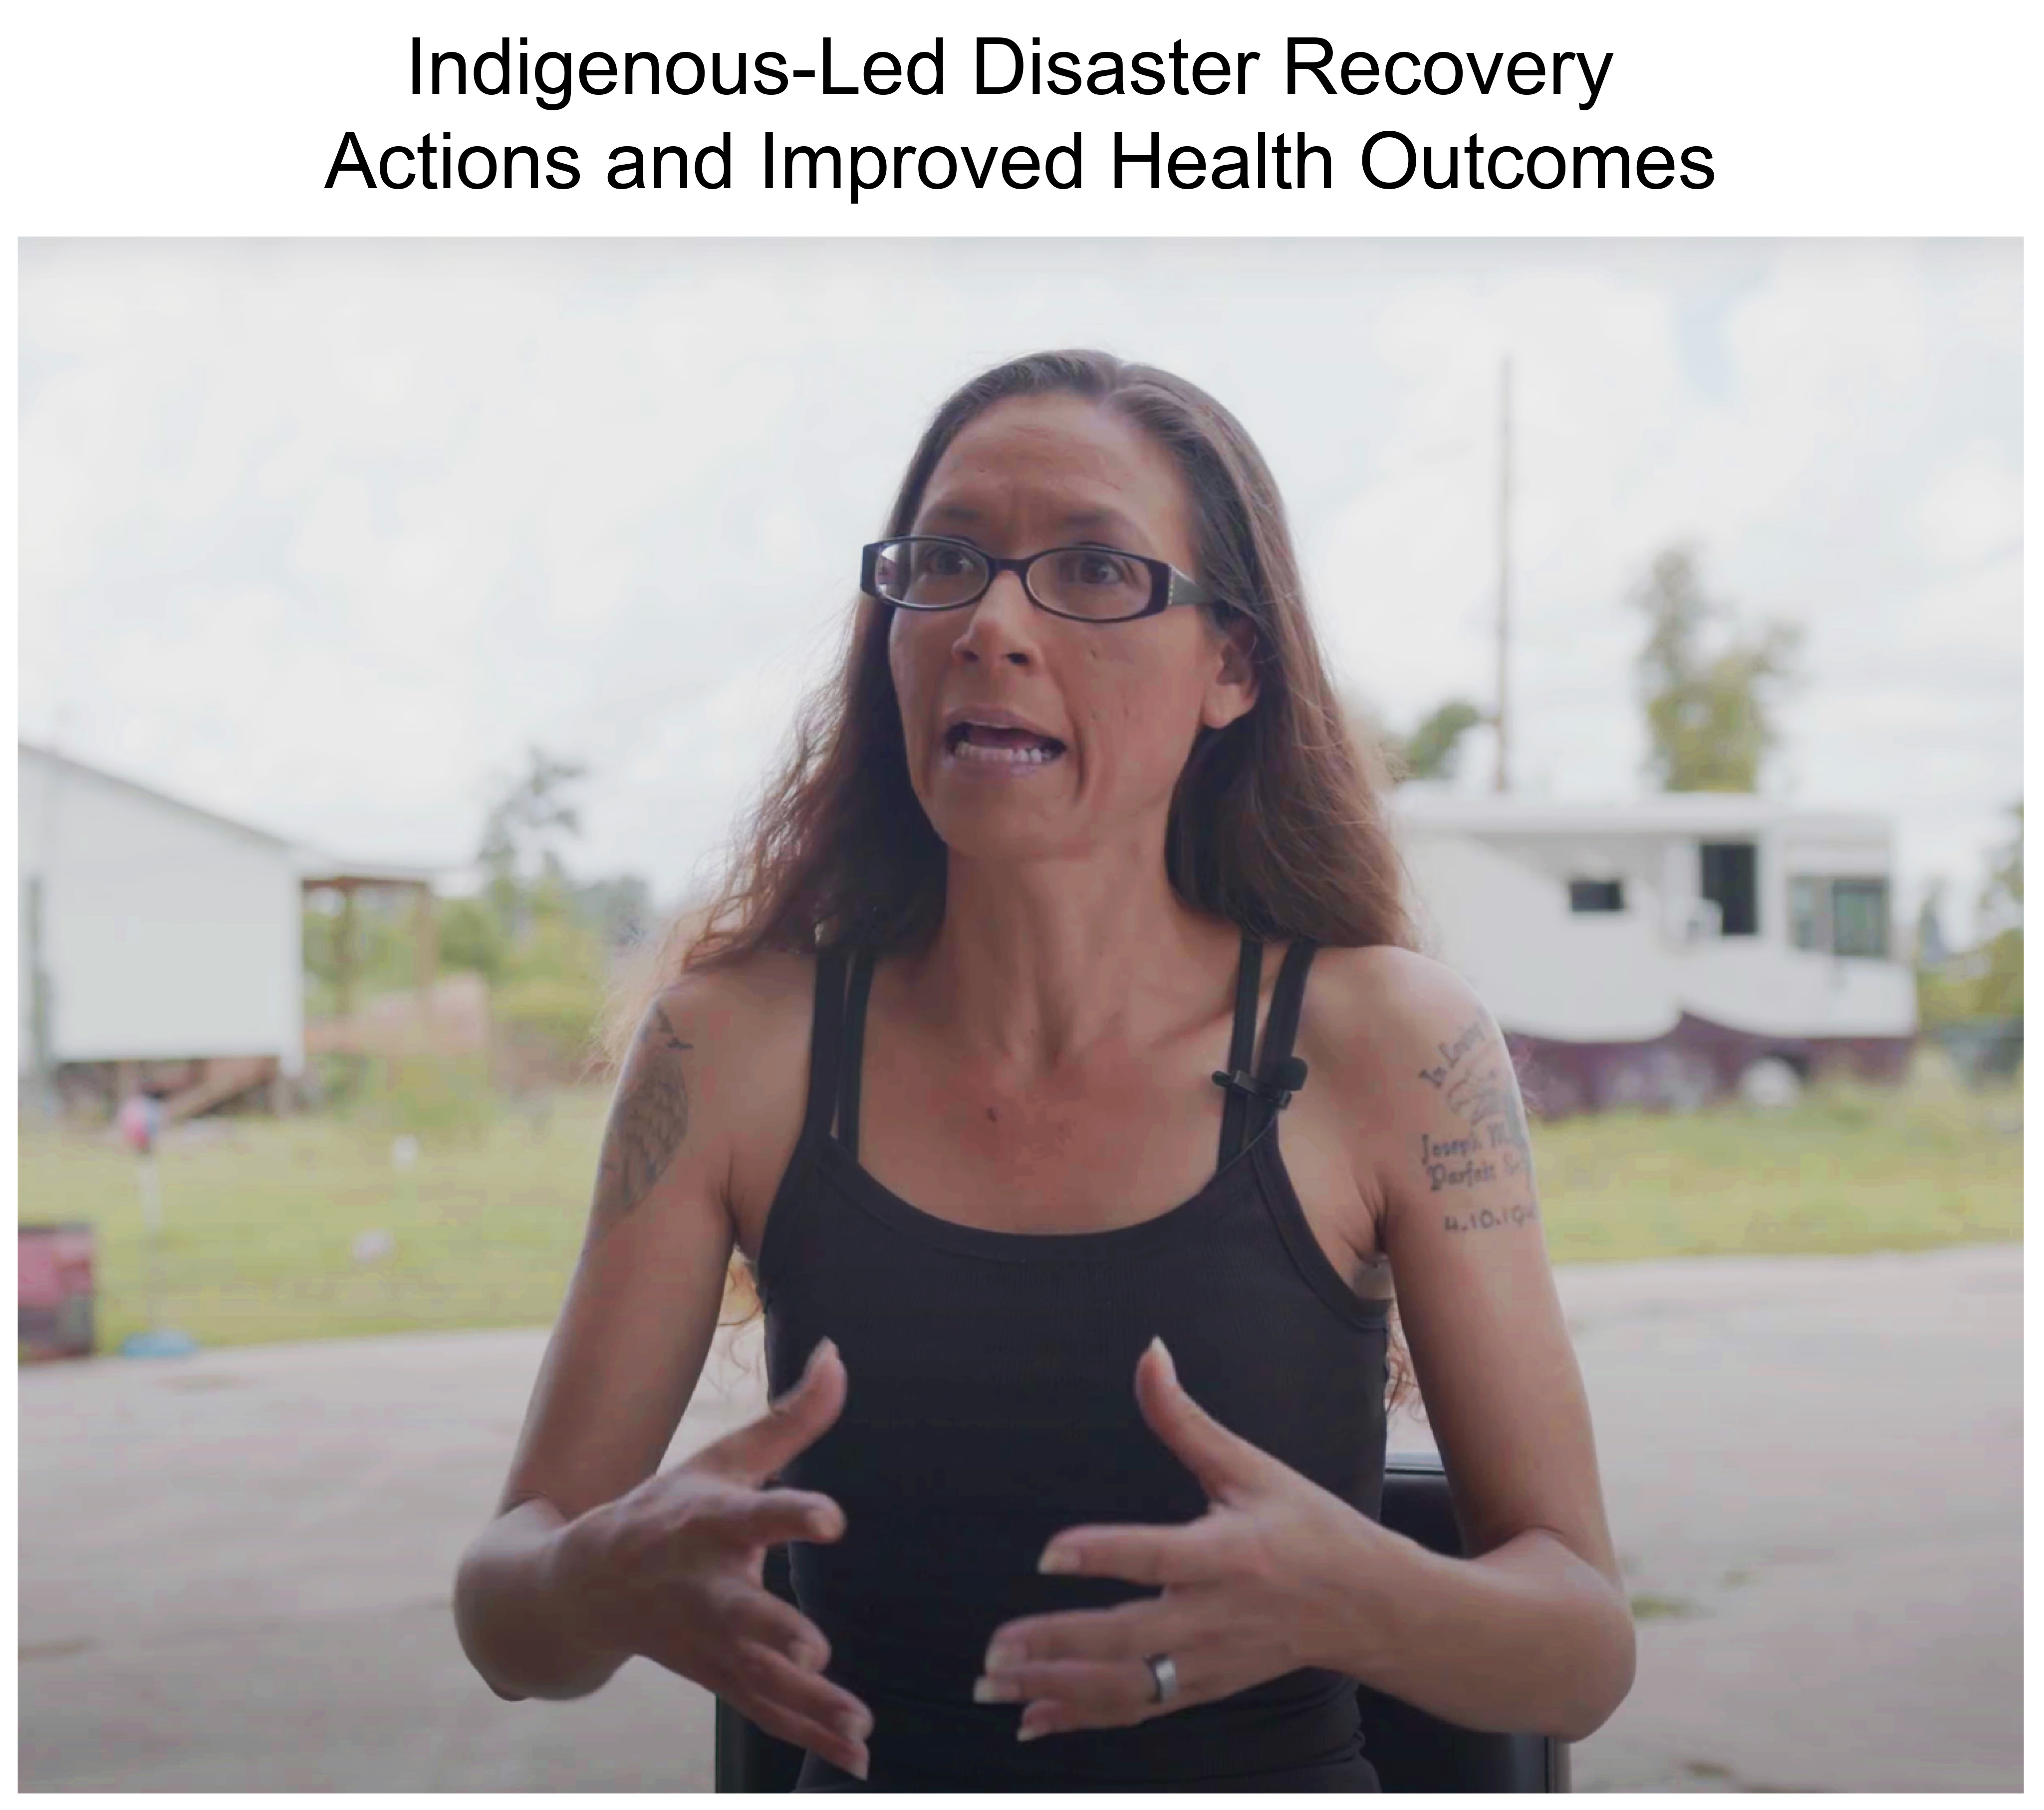 Indigenous-Led Disaster Recovery Actions and Improved Health Outcomes